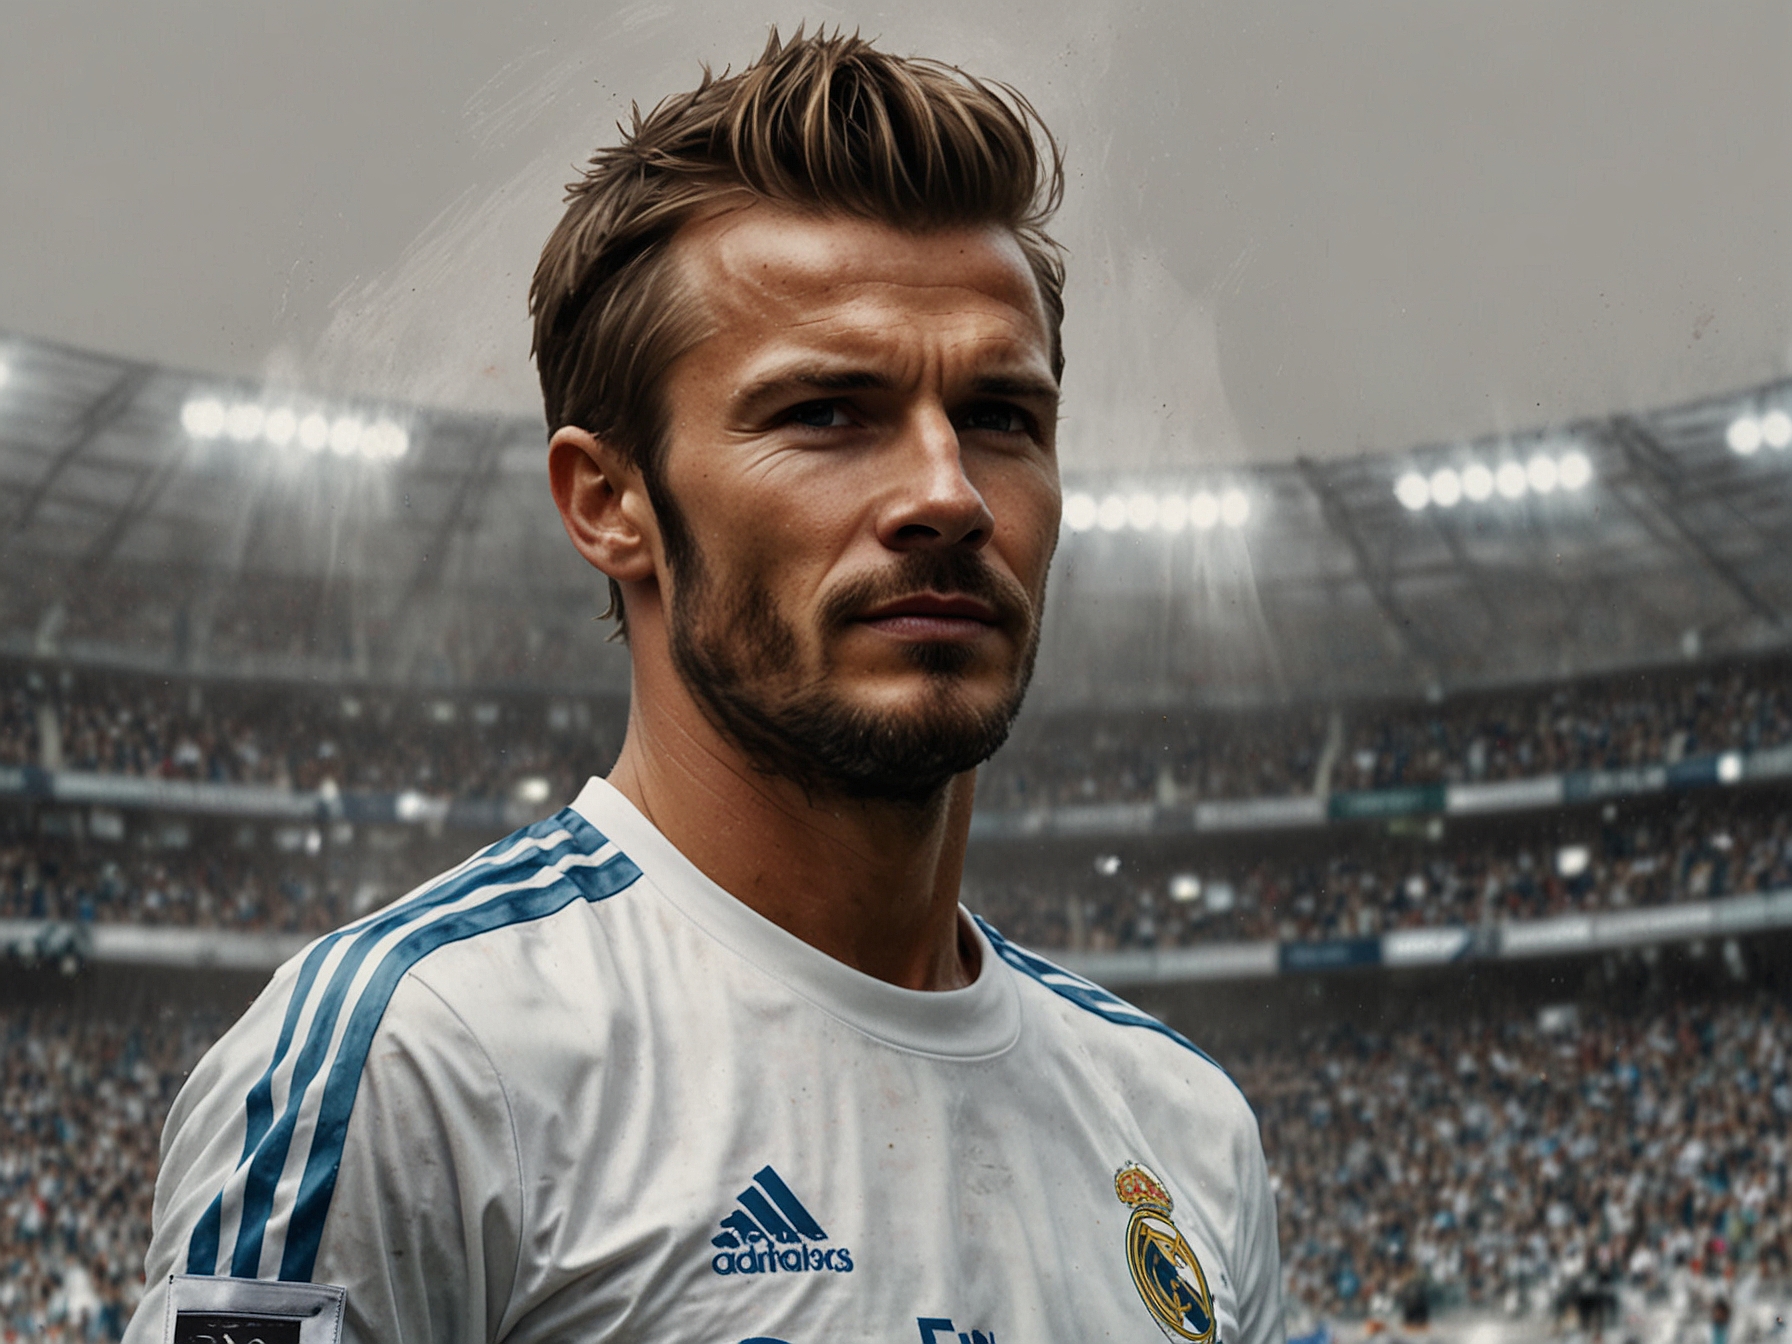 Real Madrid unveiling David Beckham in their iconic white jersey at Santiago Bernabeu.